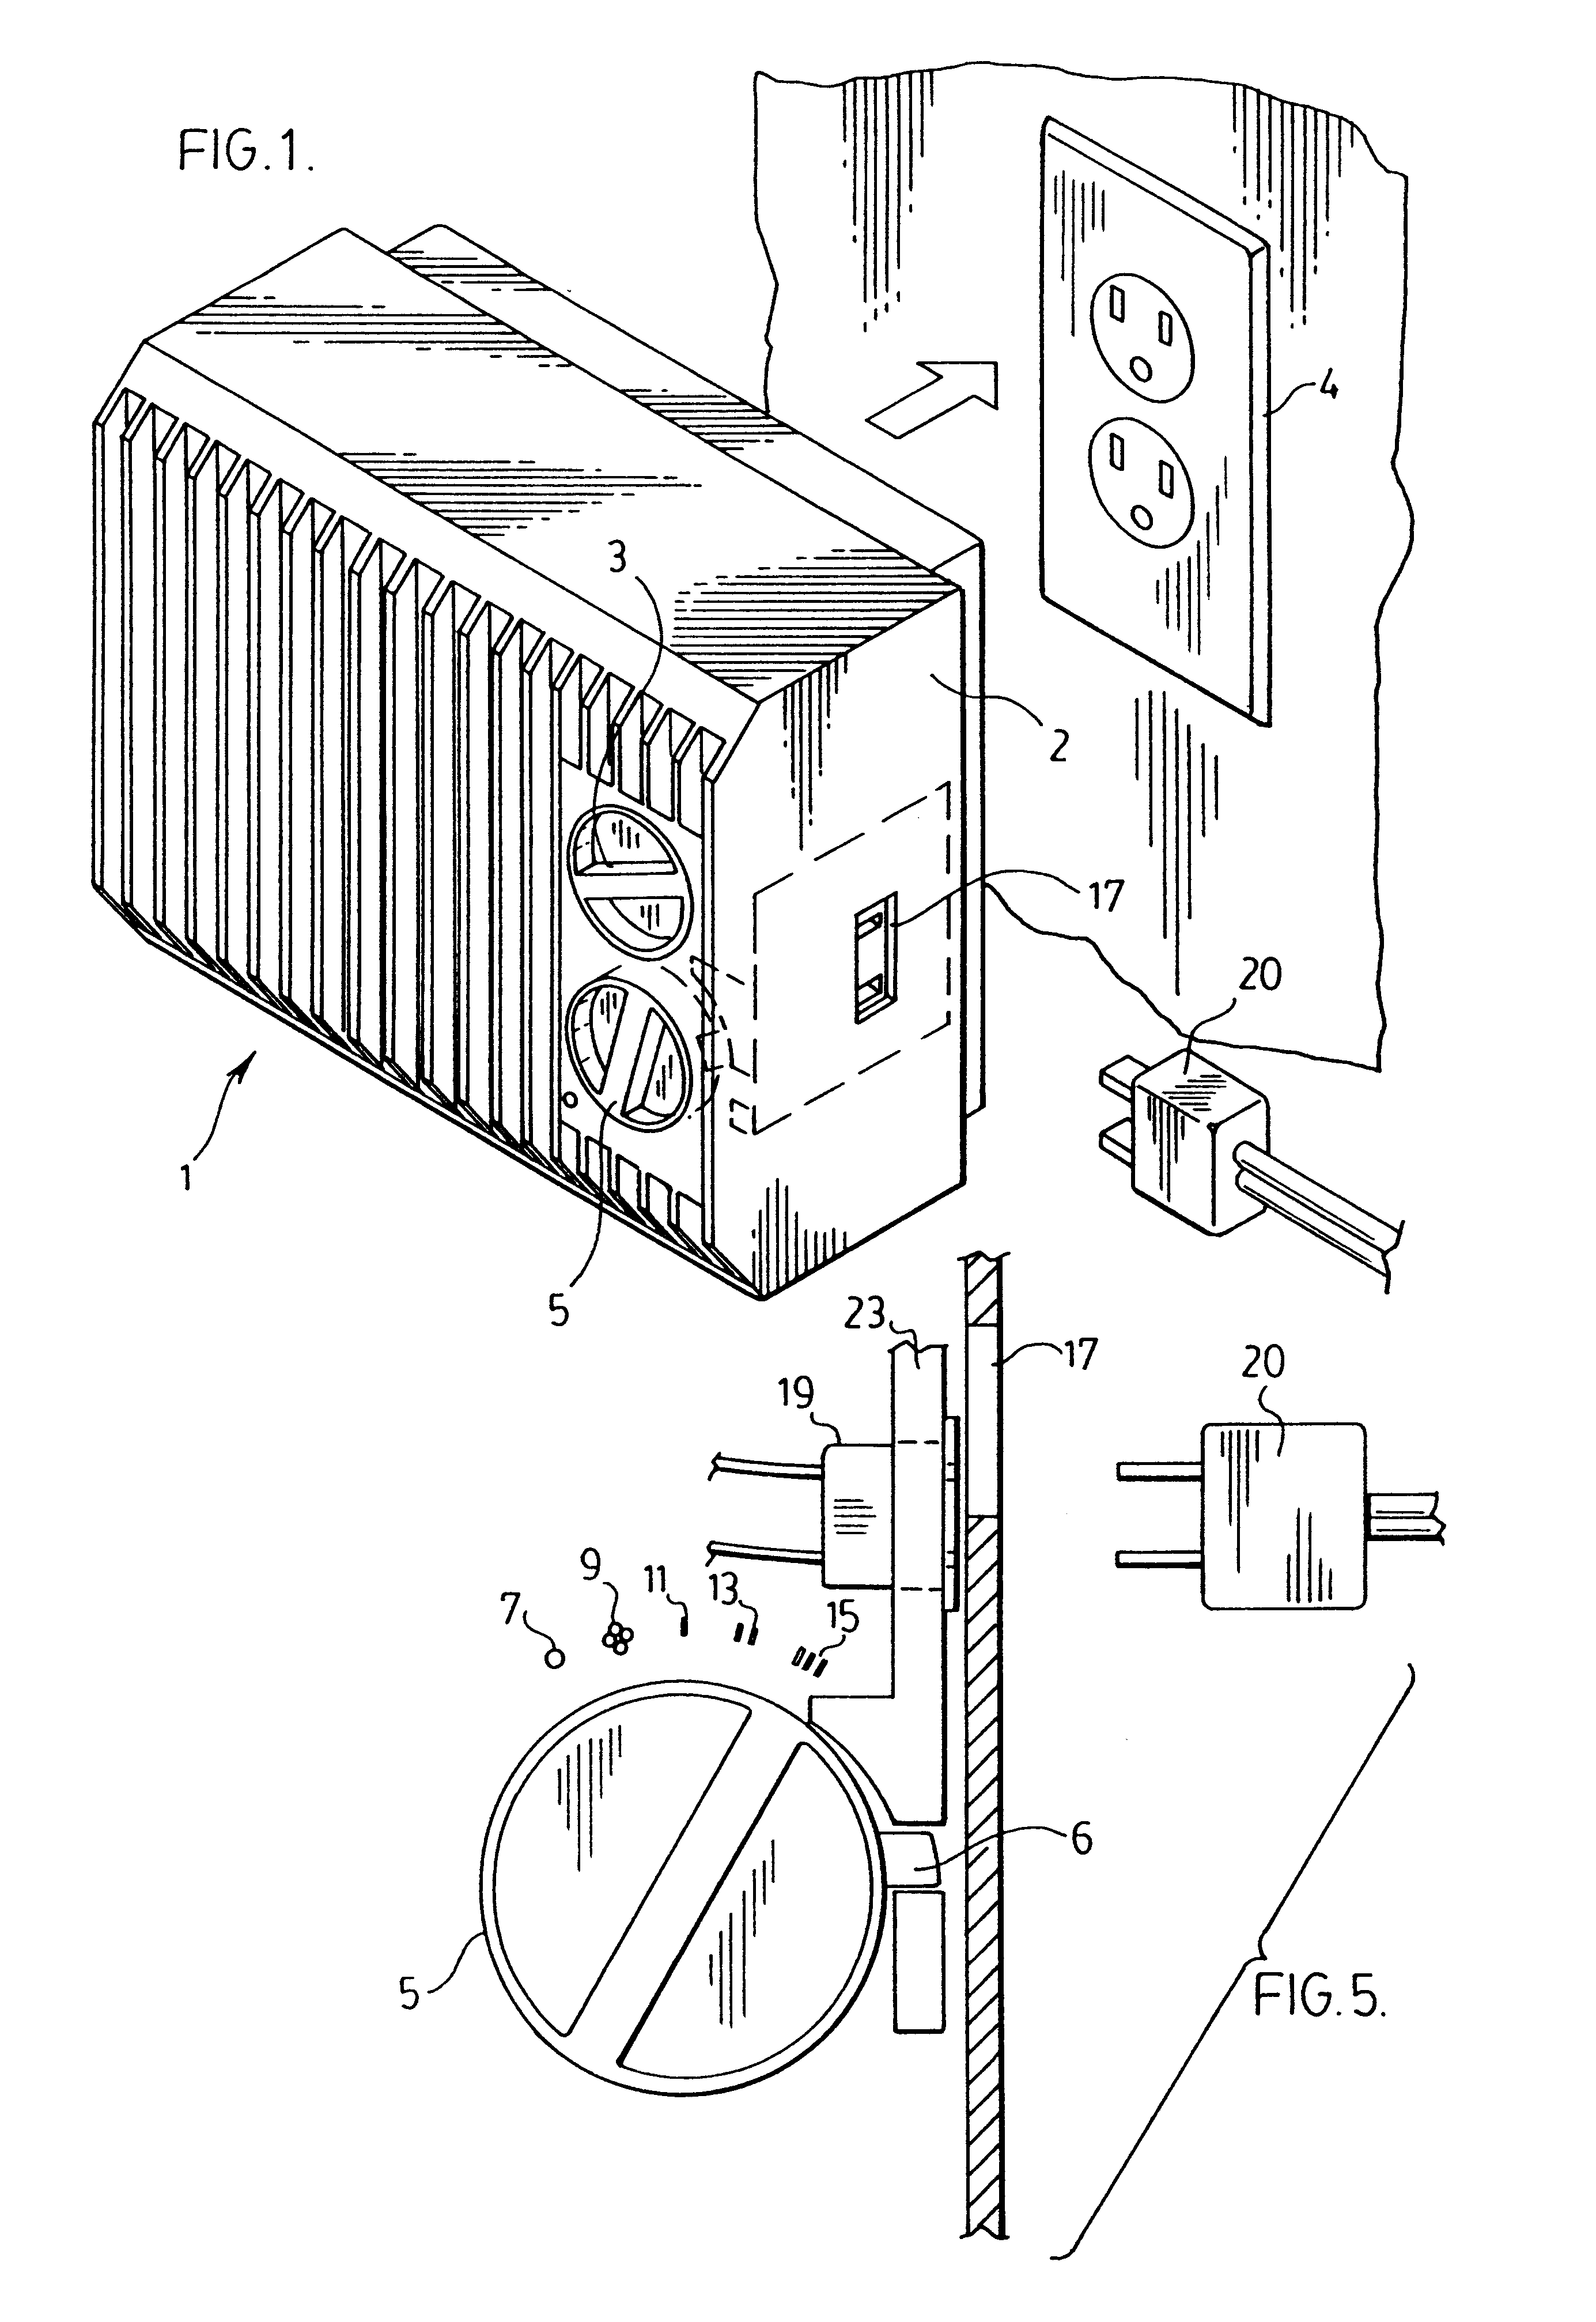 Wall mounted heater fan with electrical outlet